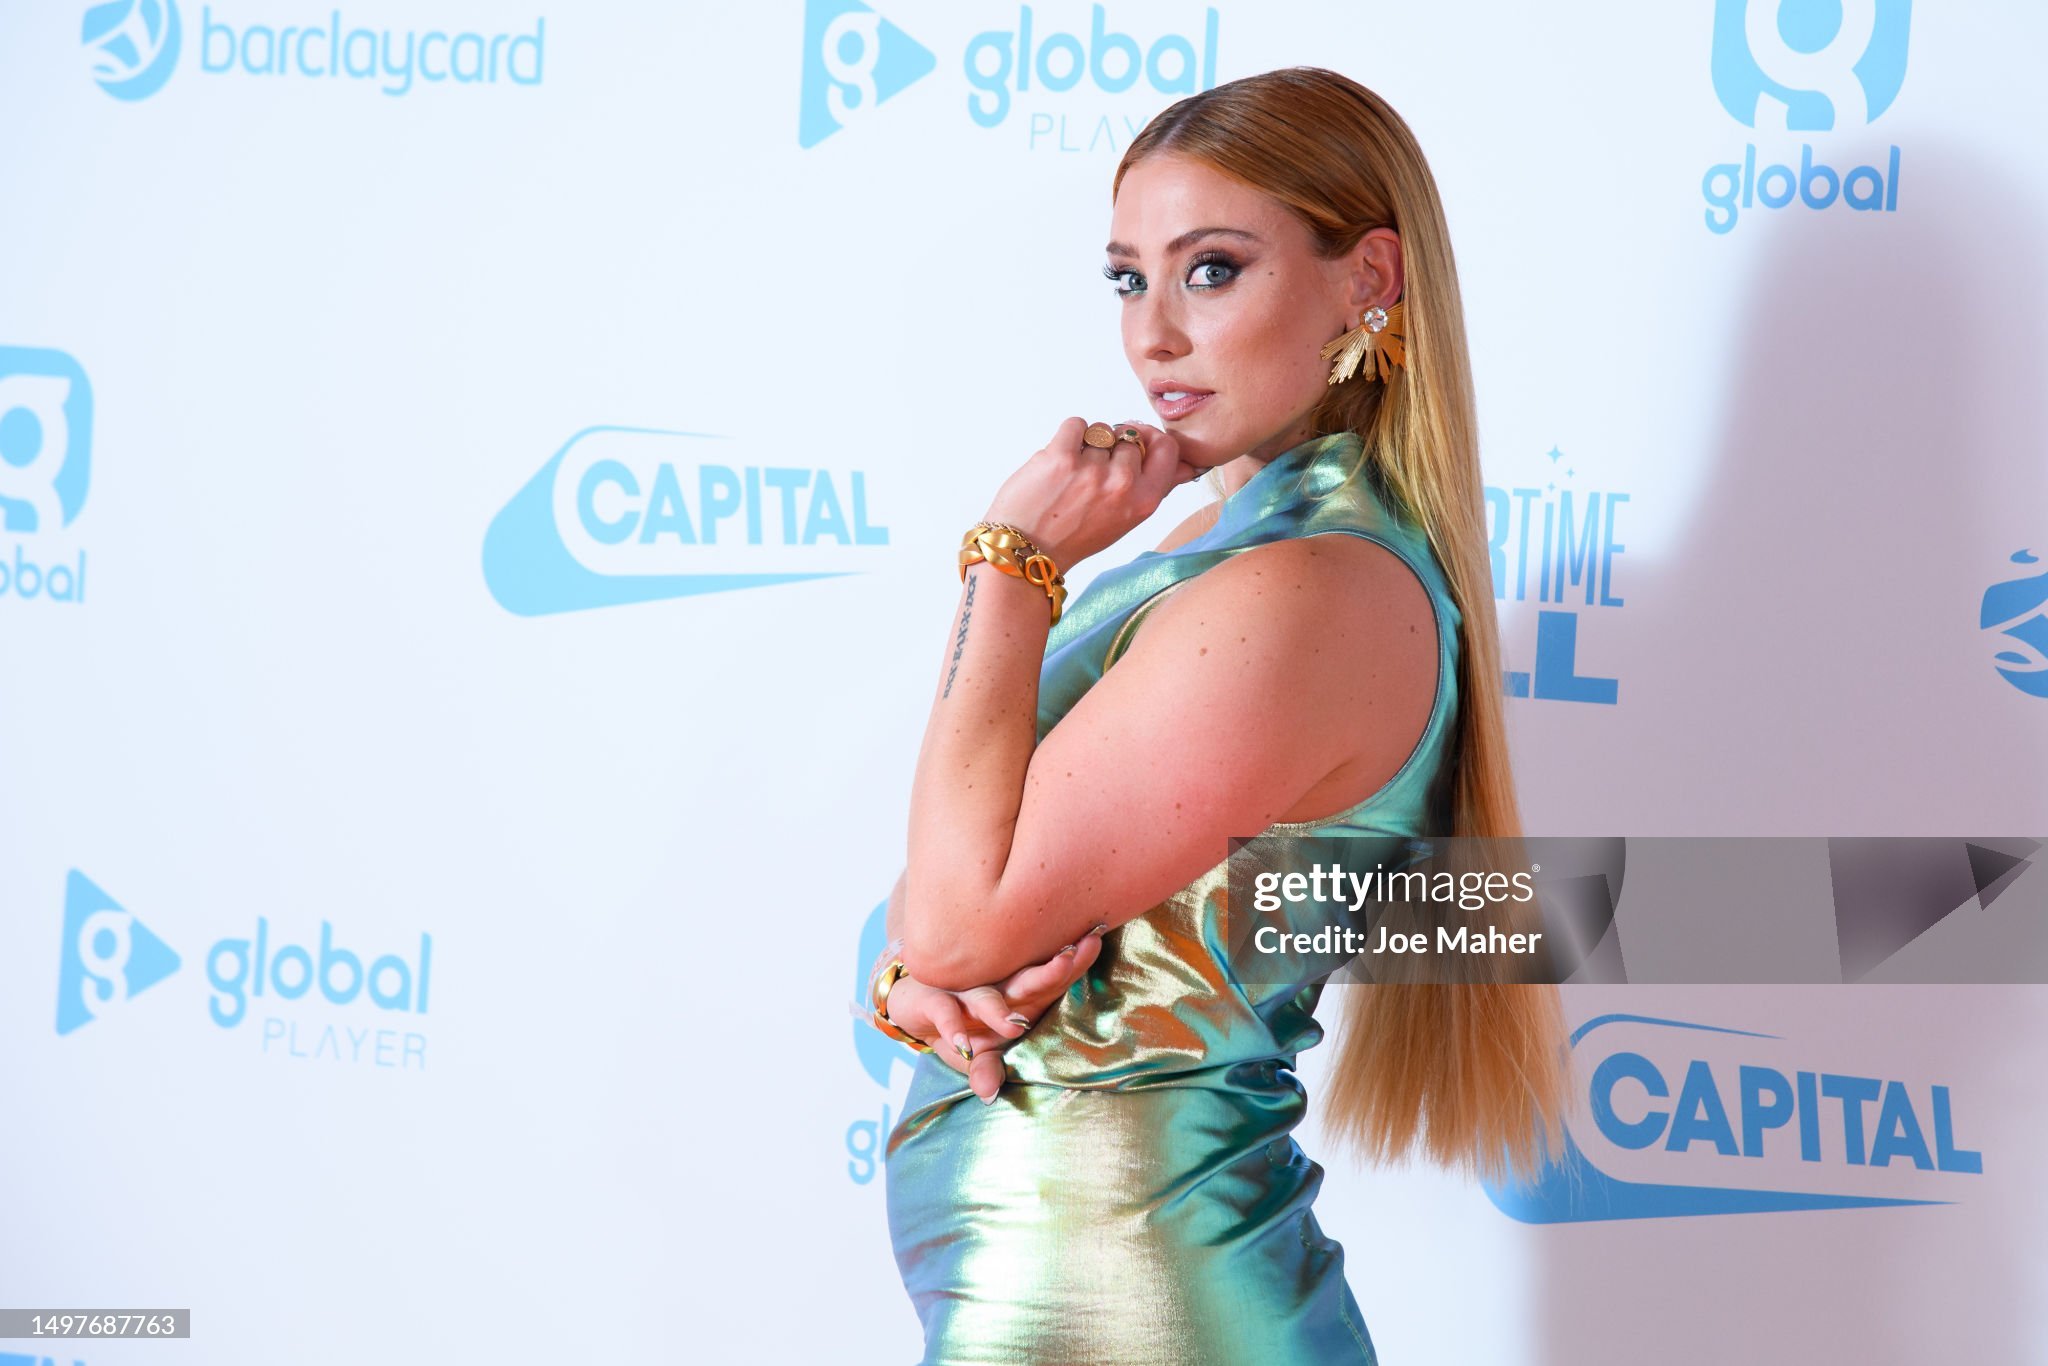 gettyimages-1497687763-2048x2048.jpg